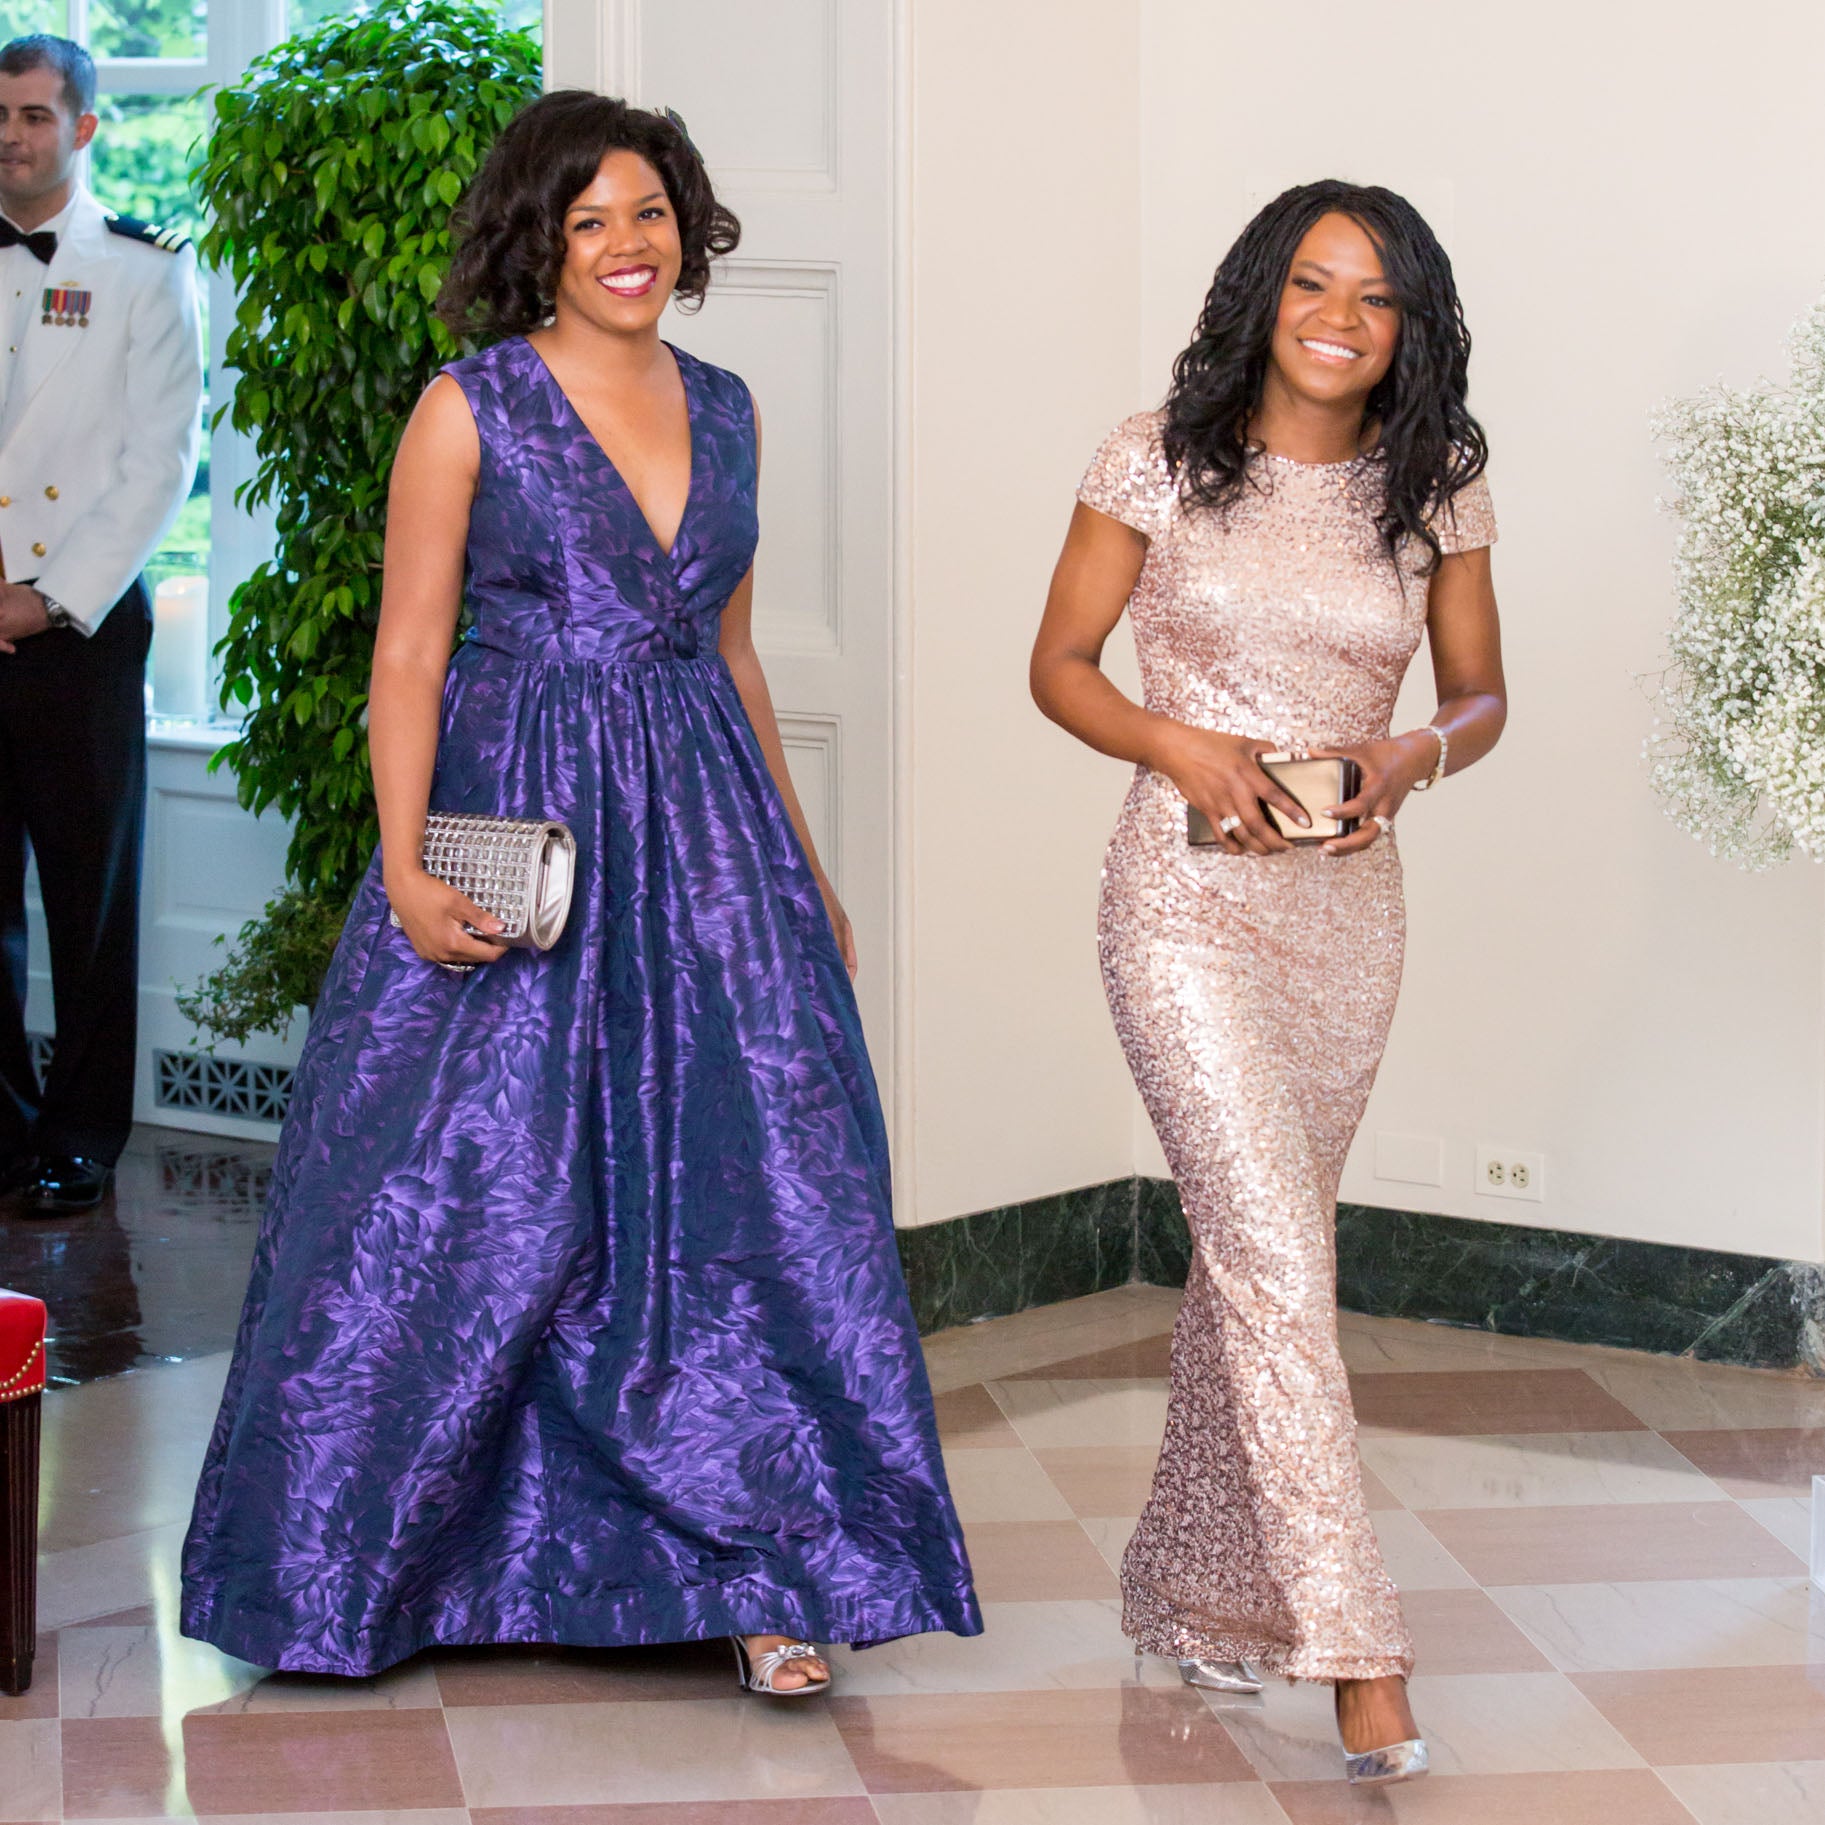 Celebs Come Out for Another Fab White House State Dinner
